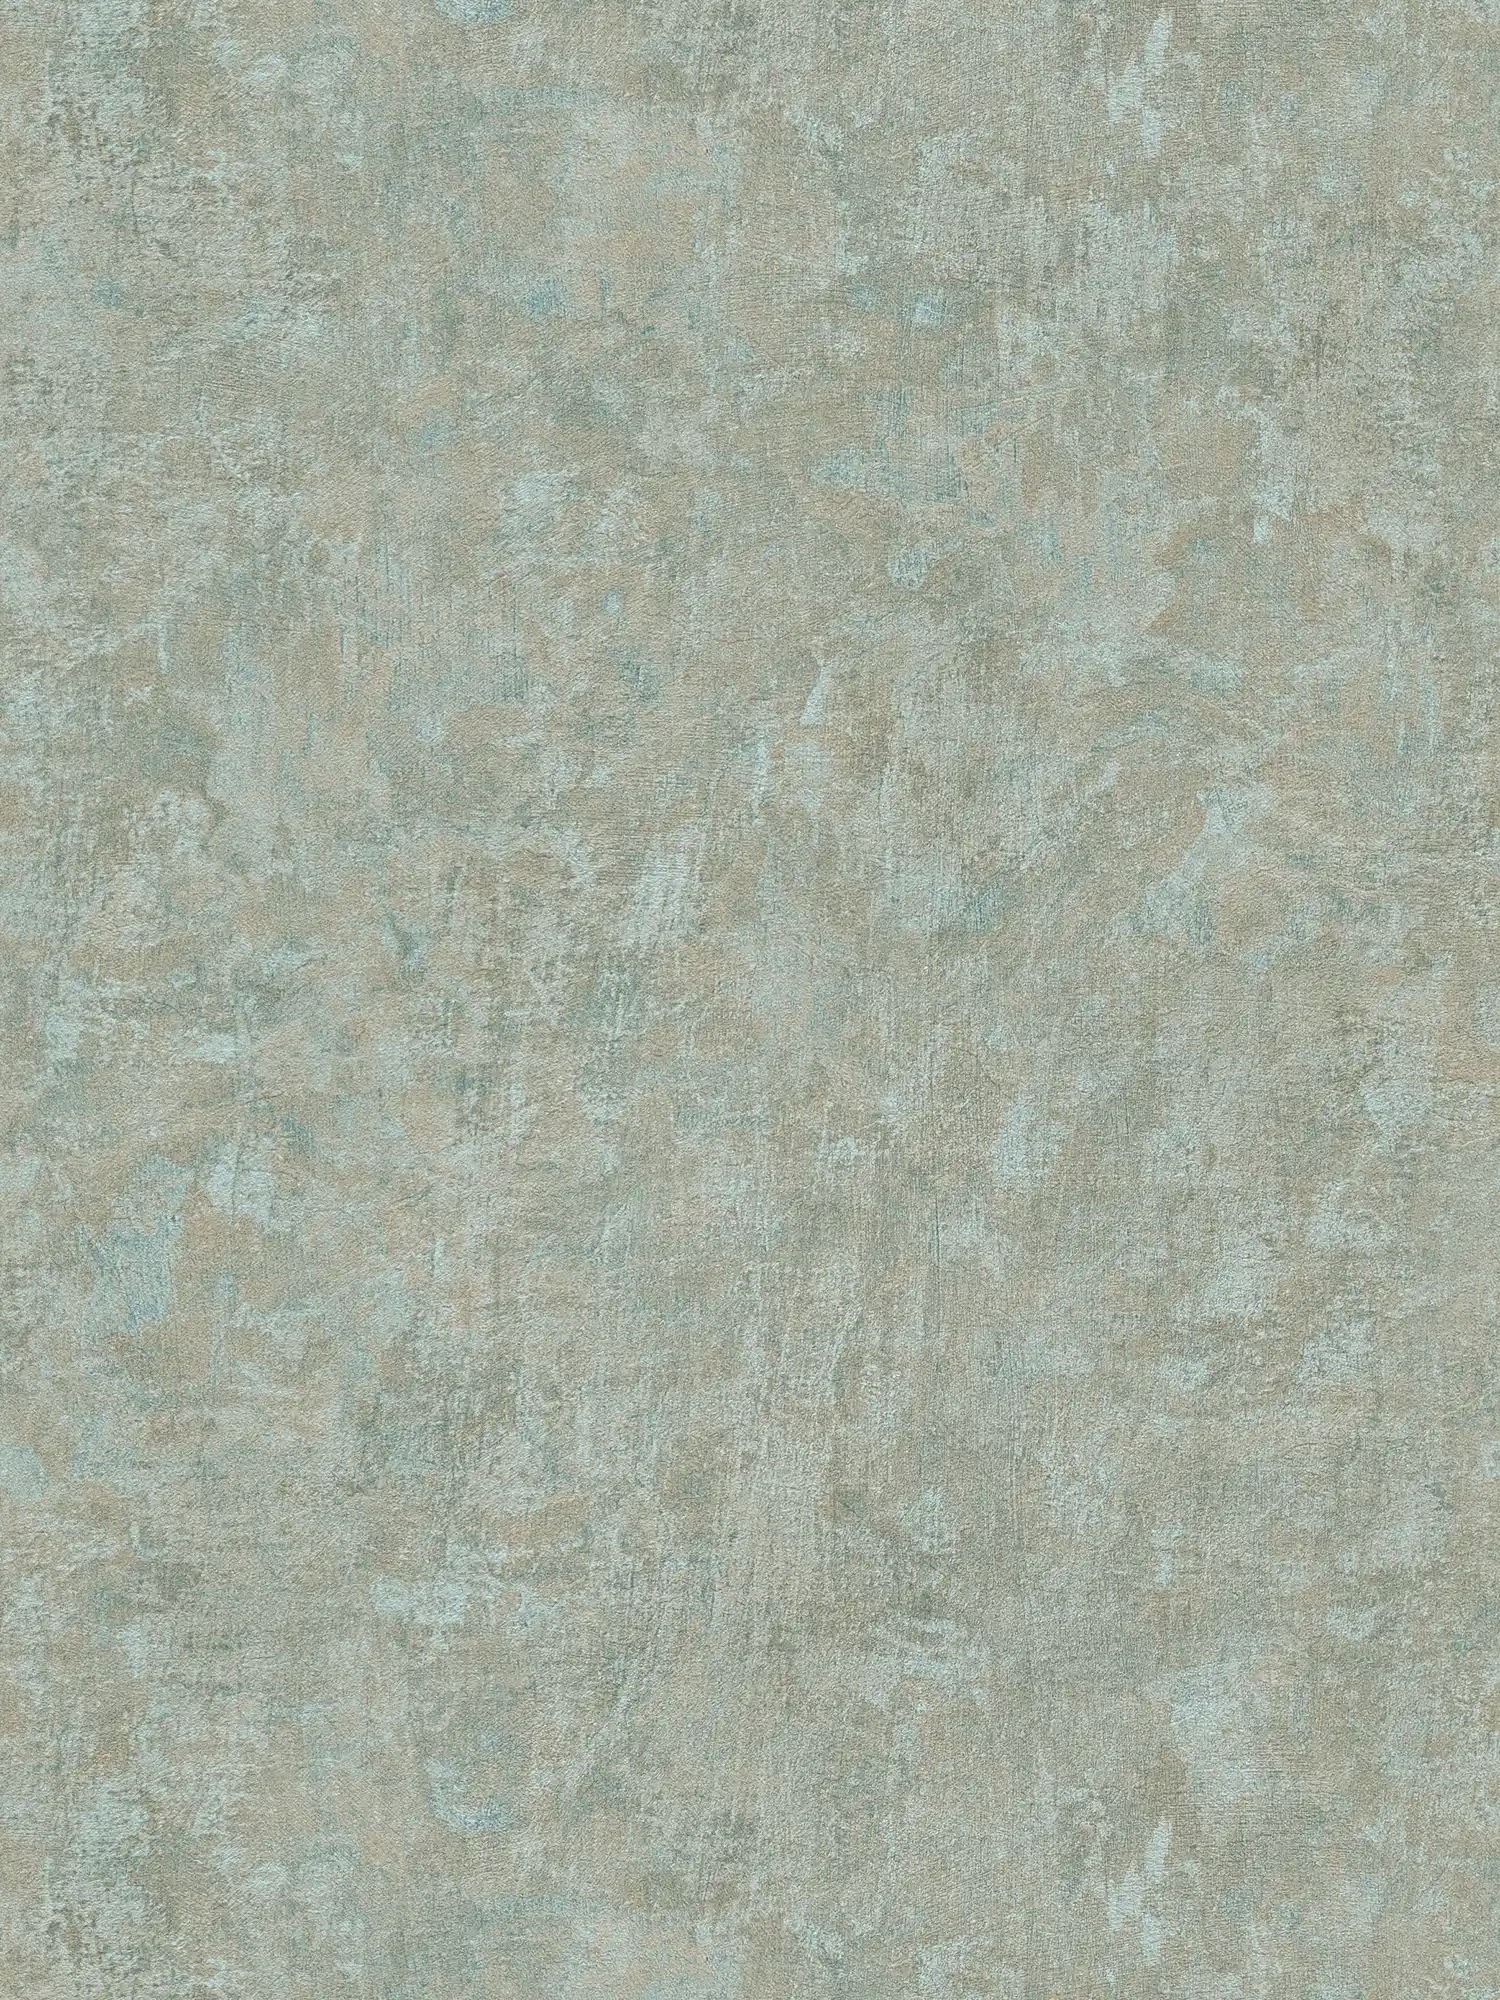 PVC-free non-woven wallpaper with textured look - green, blue
